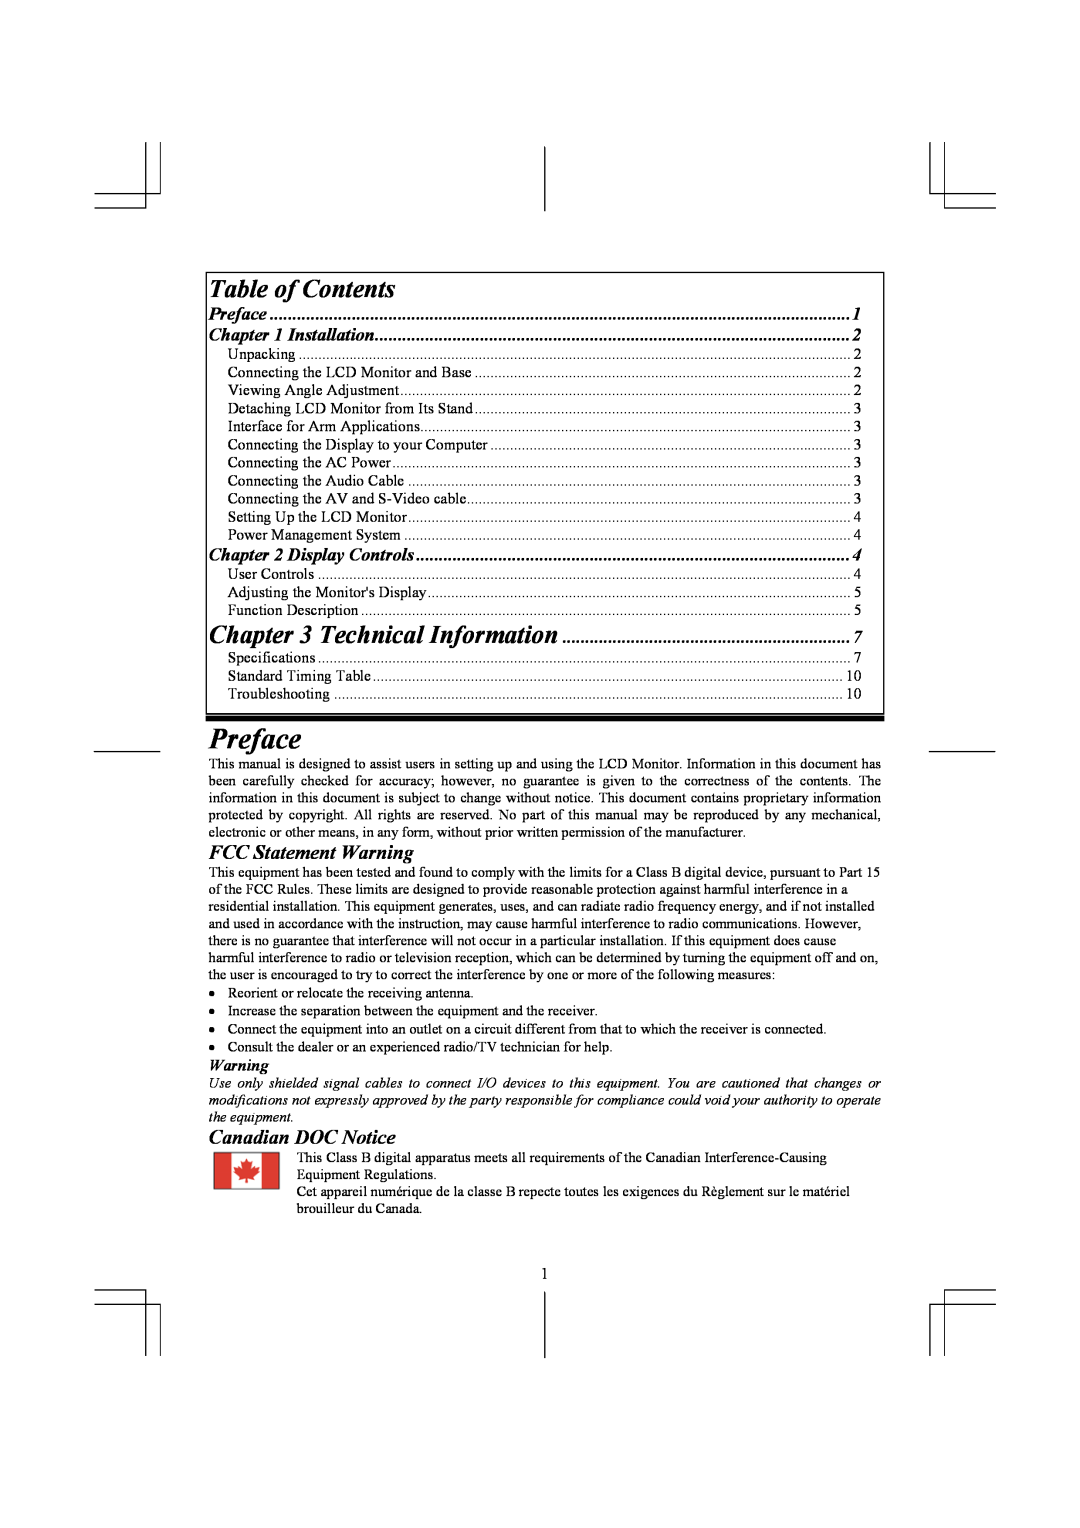 Acer AL1731 specifications Preface, Table of Contents, FCC Statement Warning, Canadian DOC Notice, Installation 